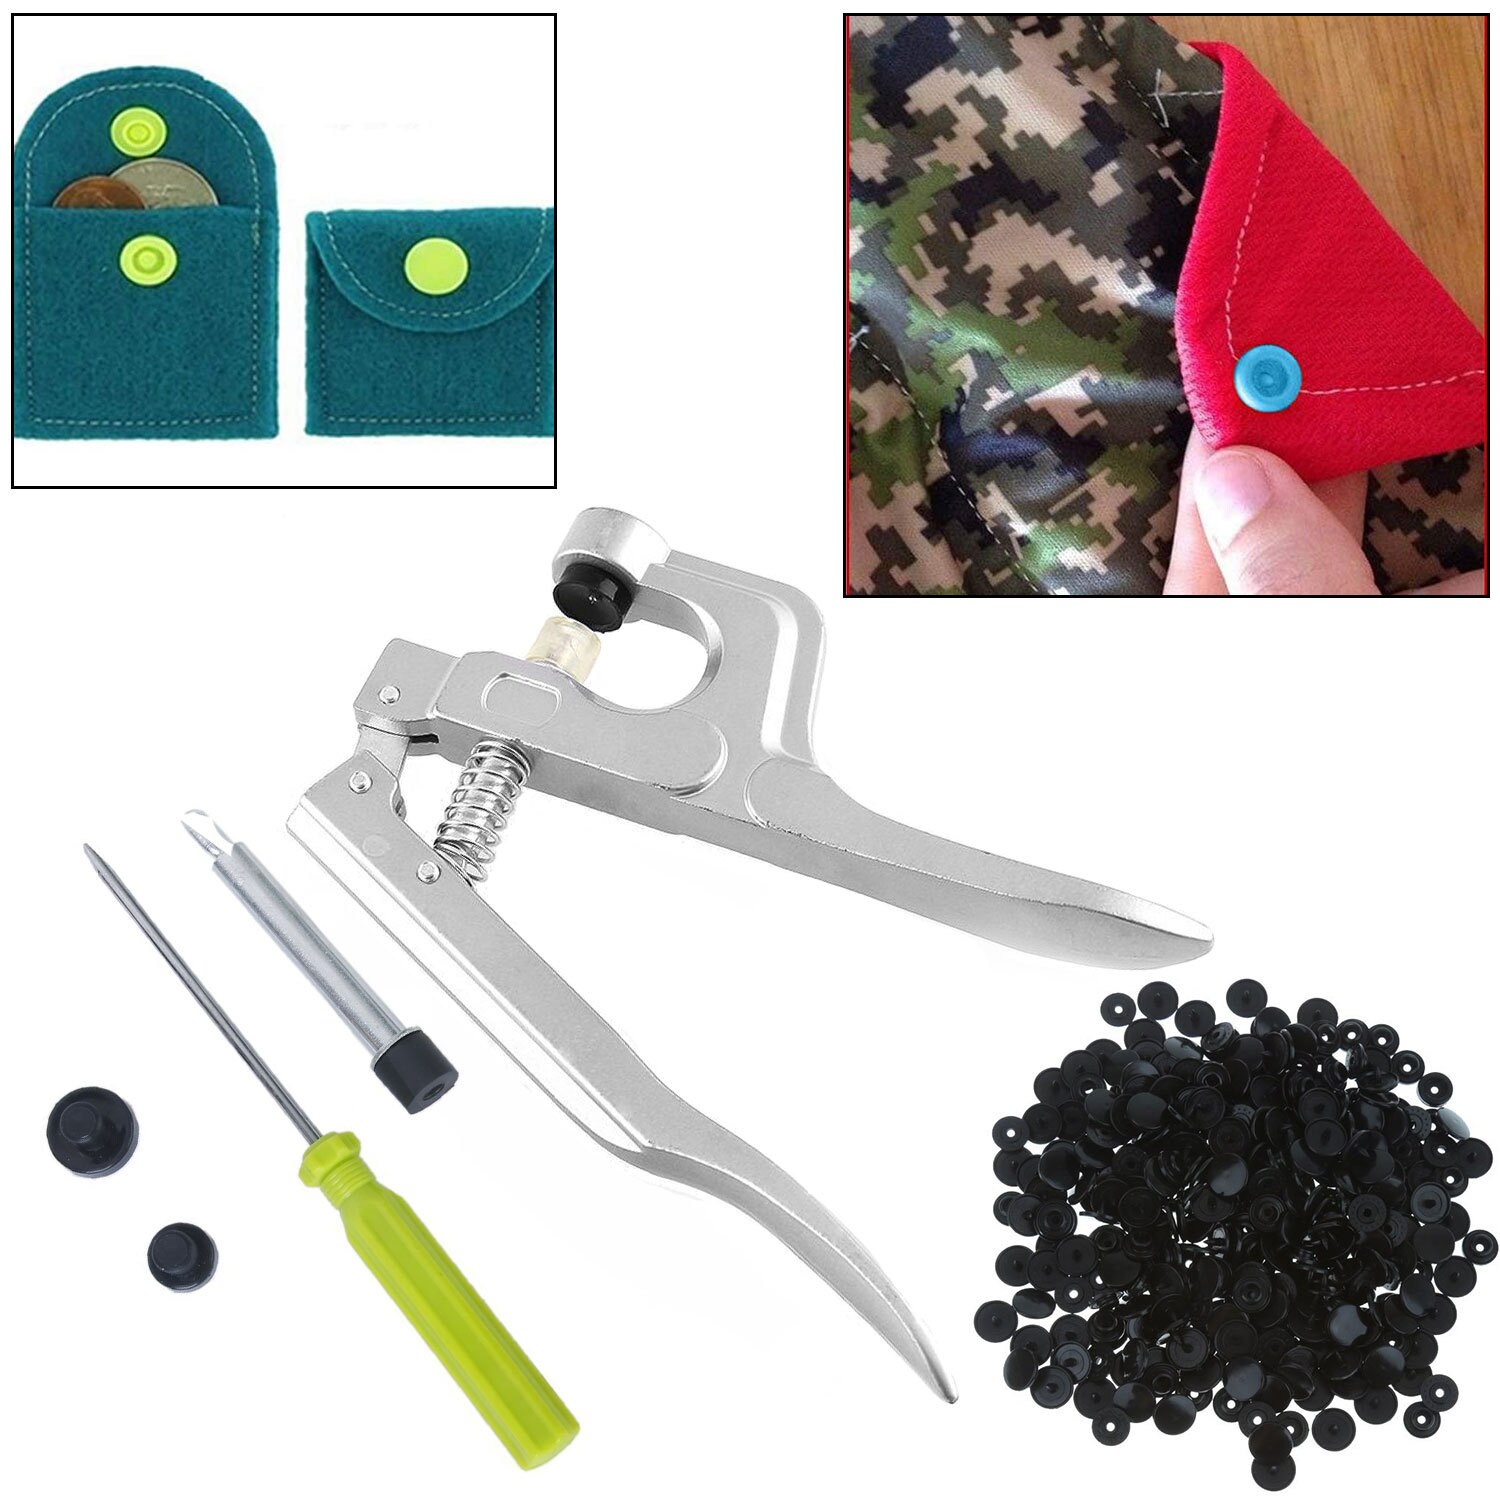 Trimming Shop KAM Snap Press Pliers T5 Plastic Snaps Starter Kit No-Sew  Hand Tool Buttons Fasteners for Woollen Clothing Kid Wear Fabrics Diapers  Bibs